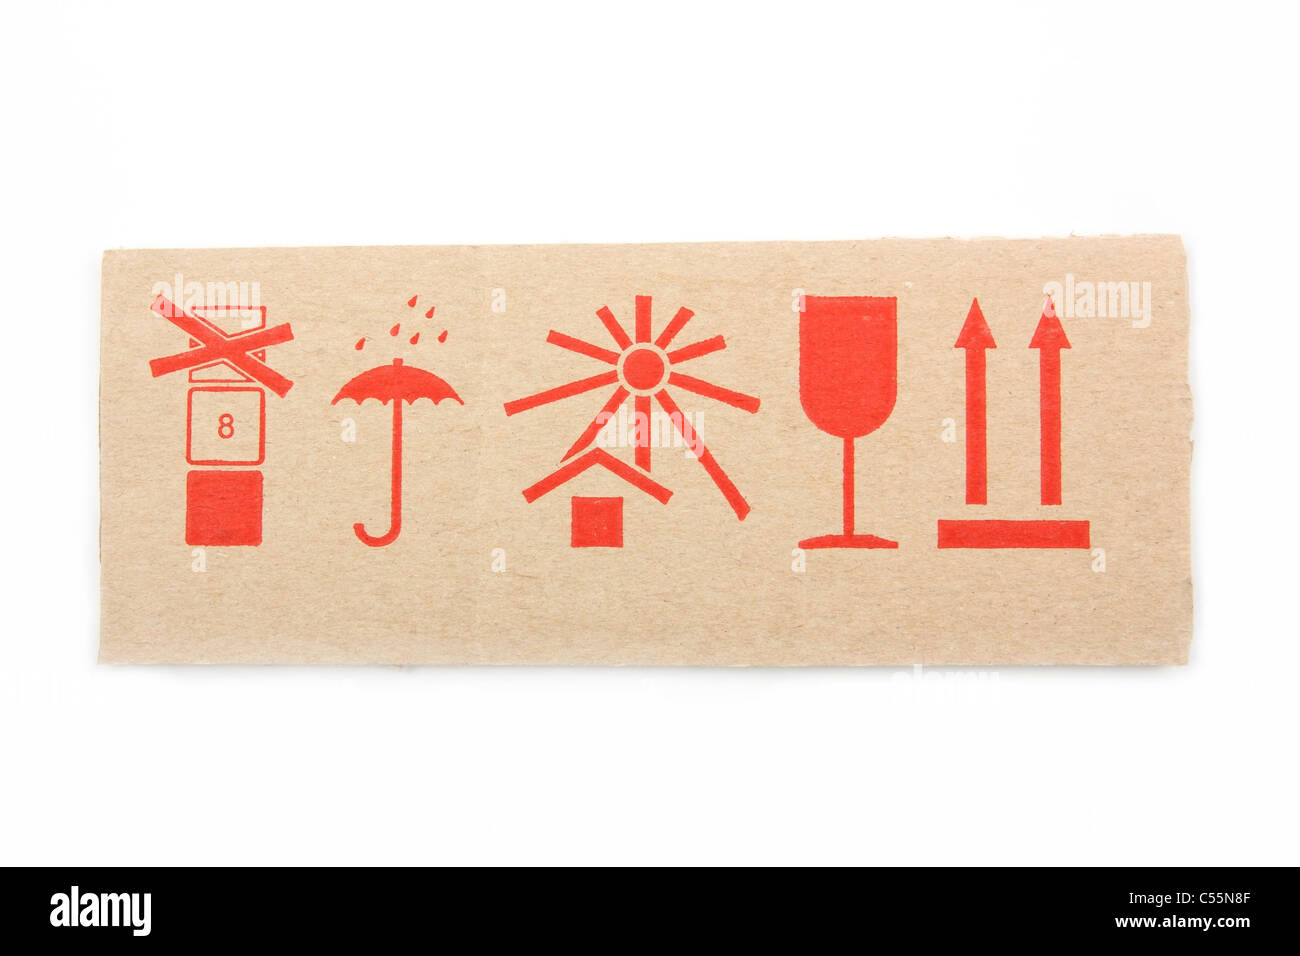 Piece carton with red warning signs on a white background Stock Photo